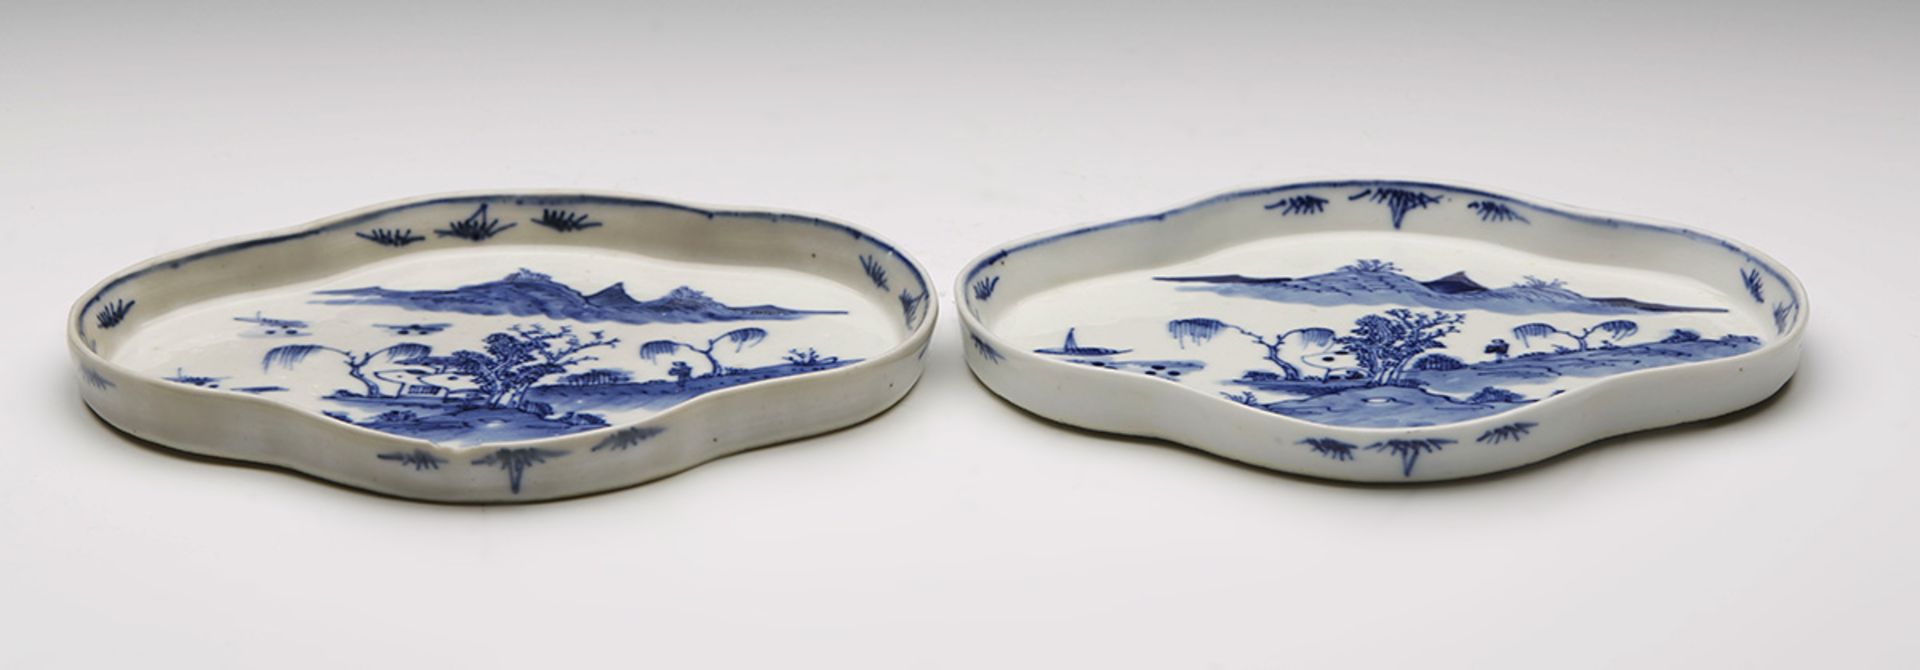 Pair Antique Chinese Qianlong Supper Dishes 18Th C. - Image 6 of 6